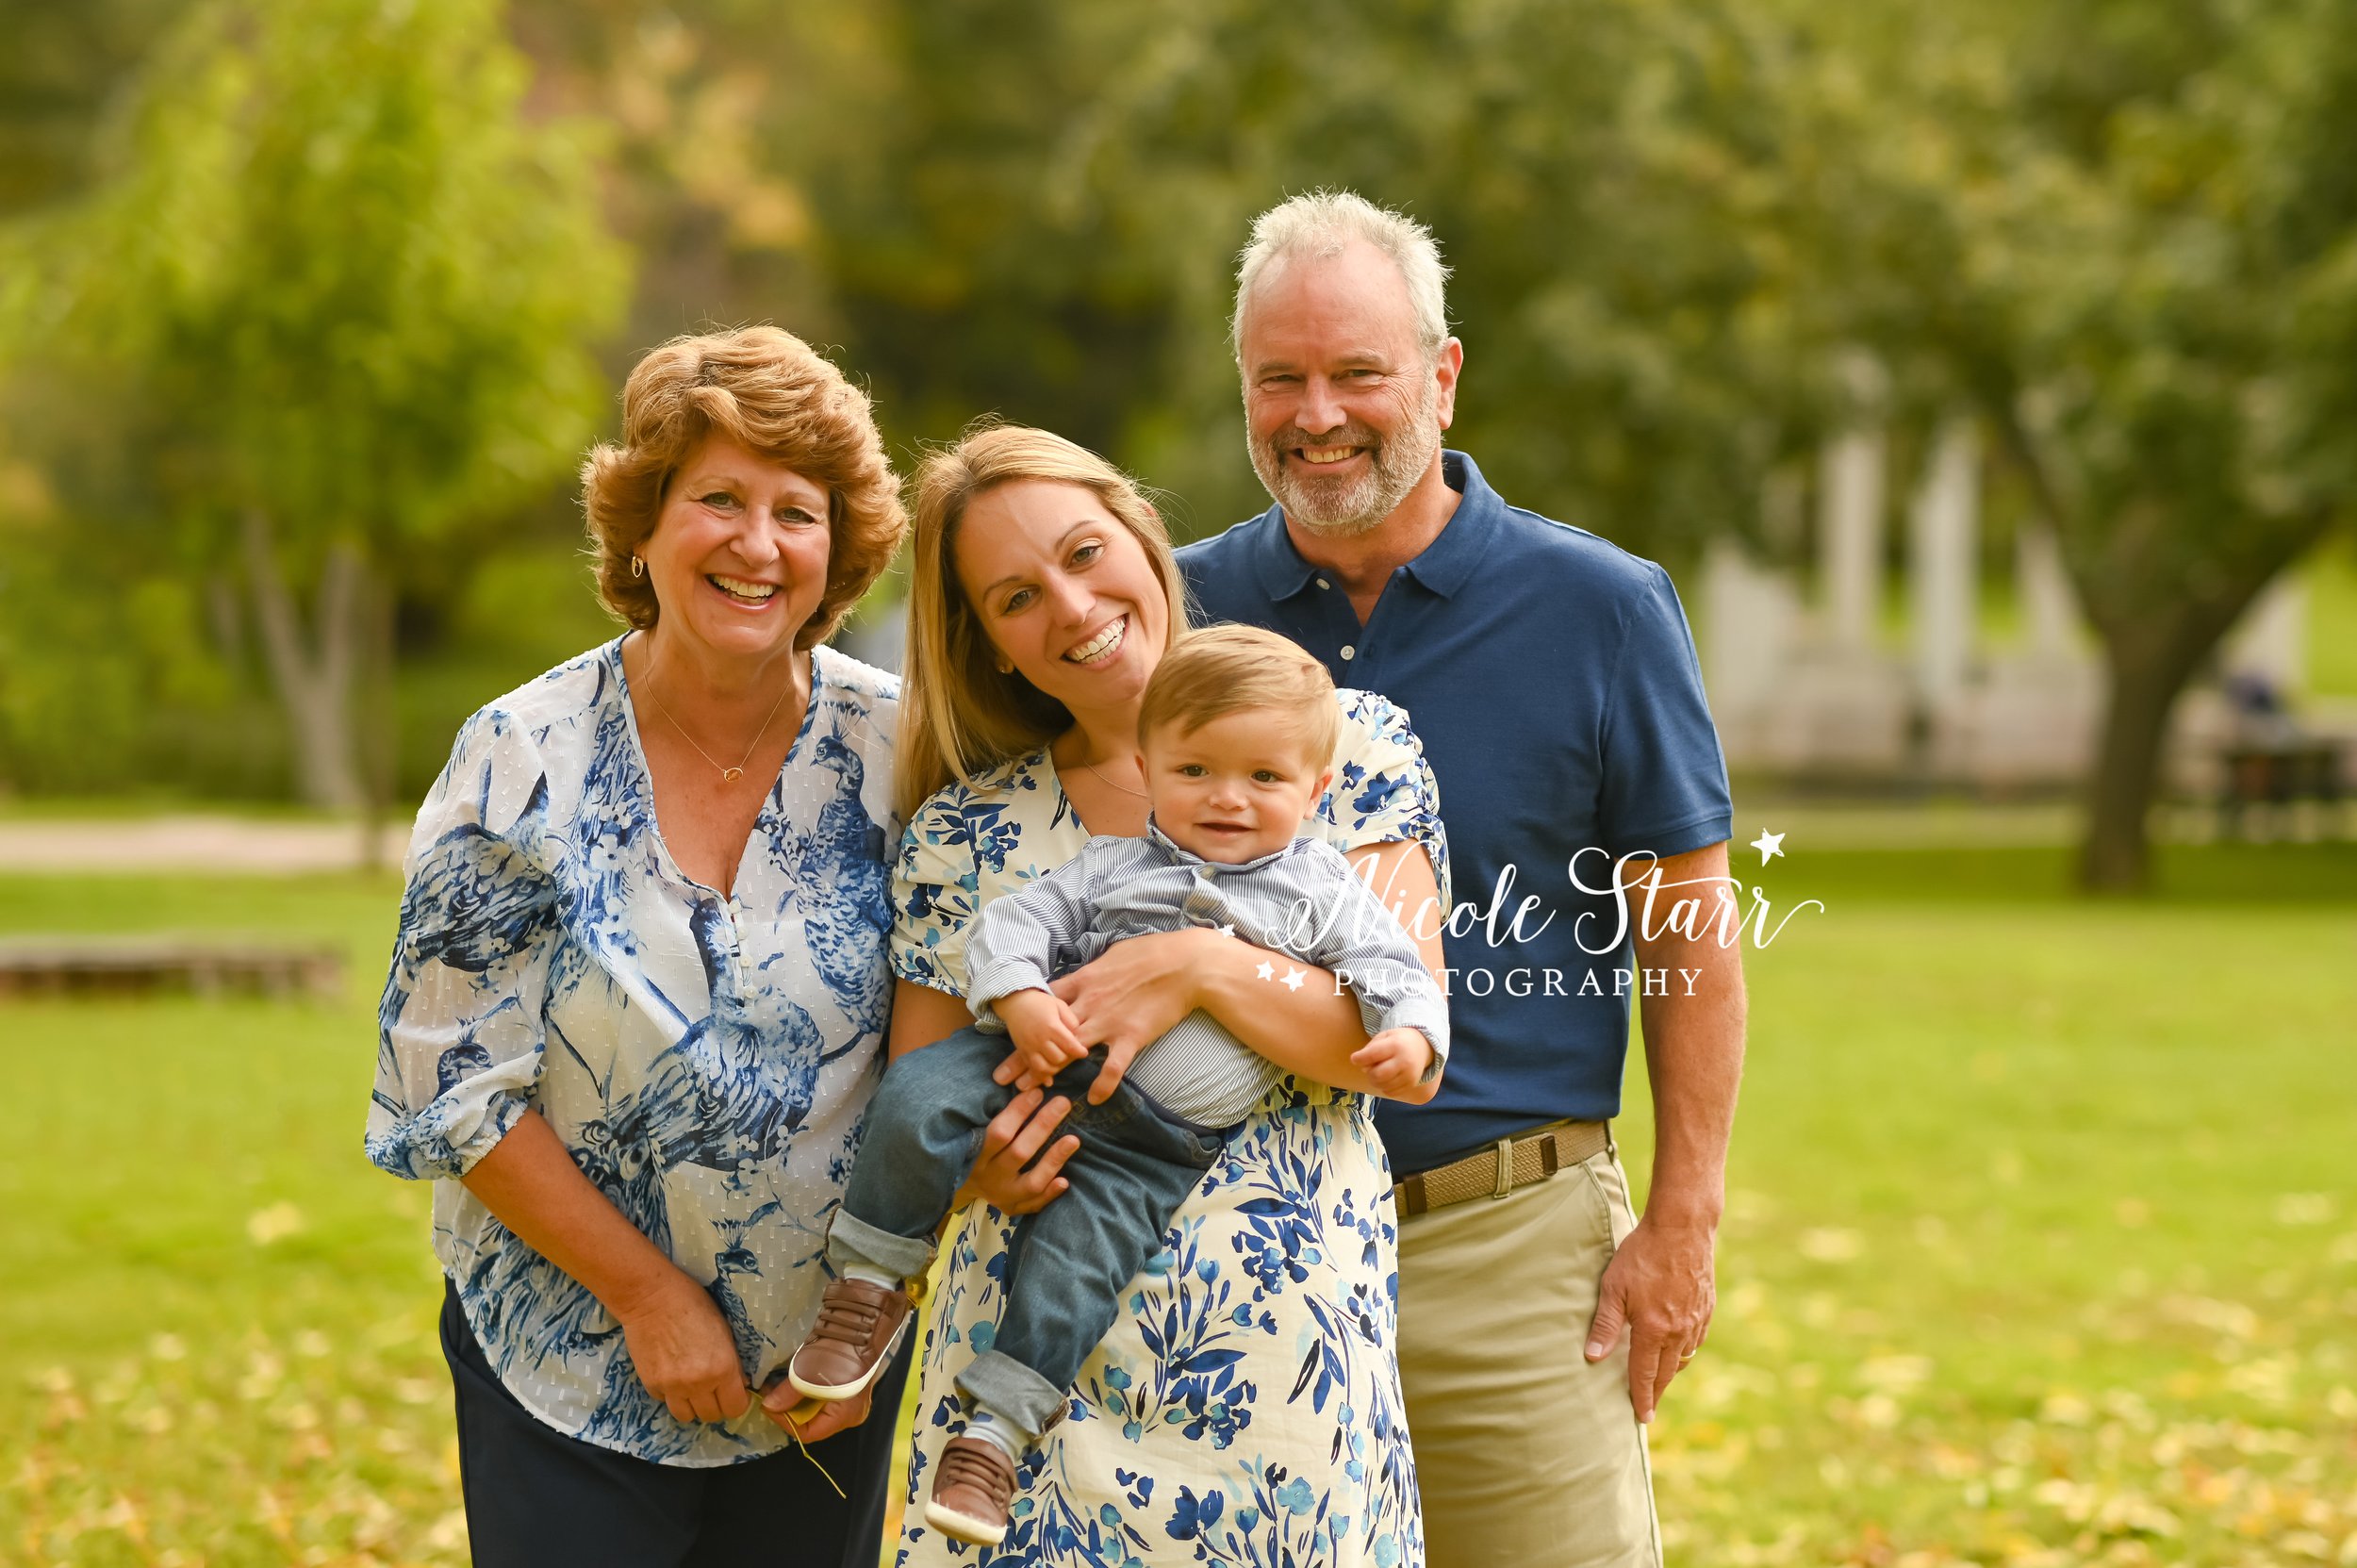 grandparents pose with daughter and grandson during family portraits with Saratoga Springs family photographer Nicole Starr Photography